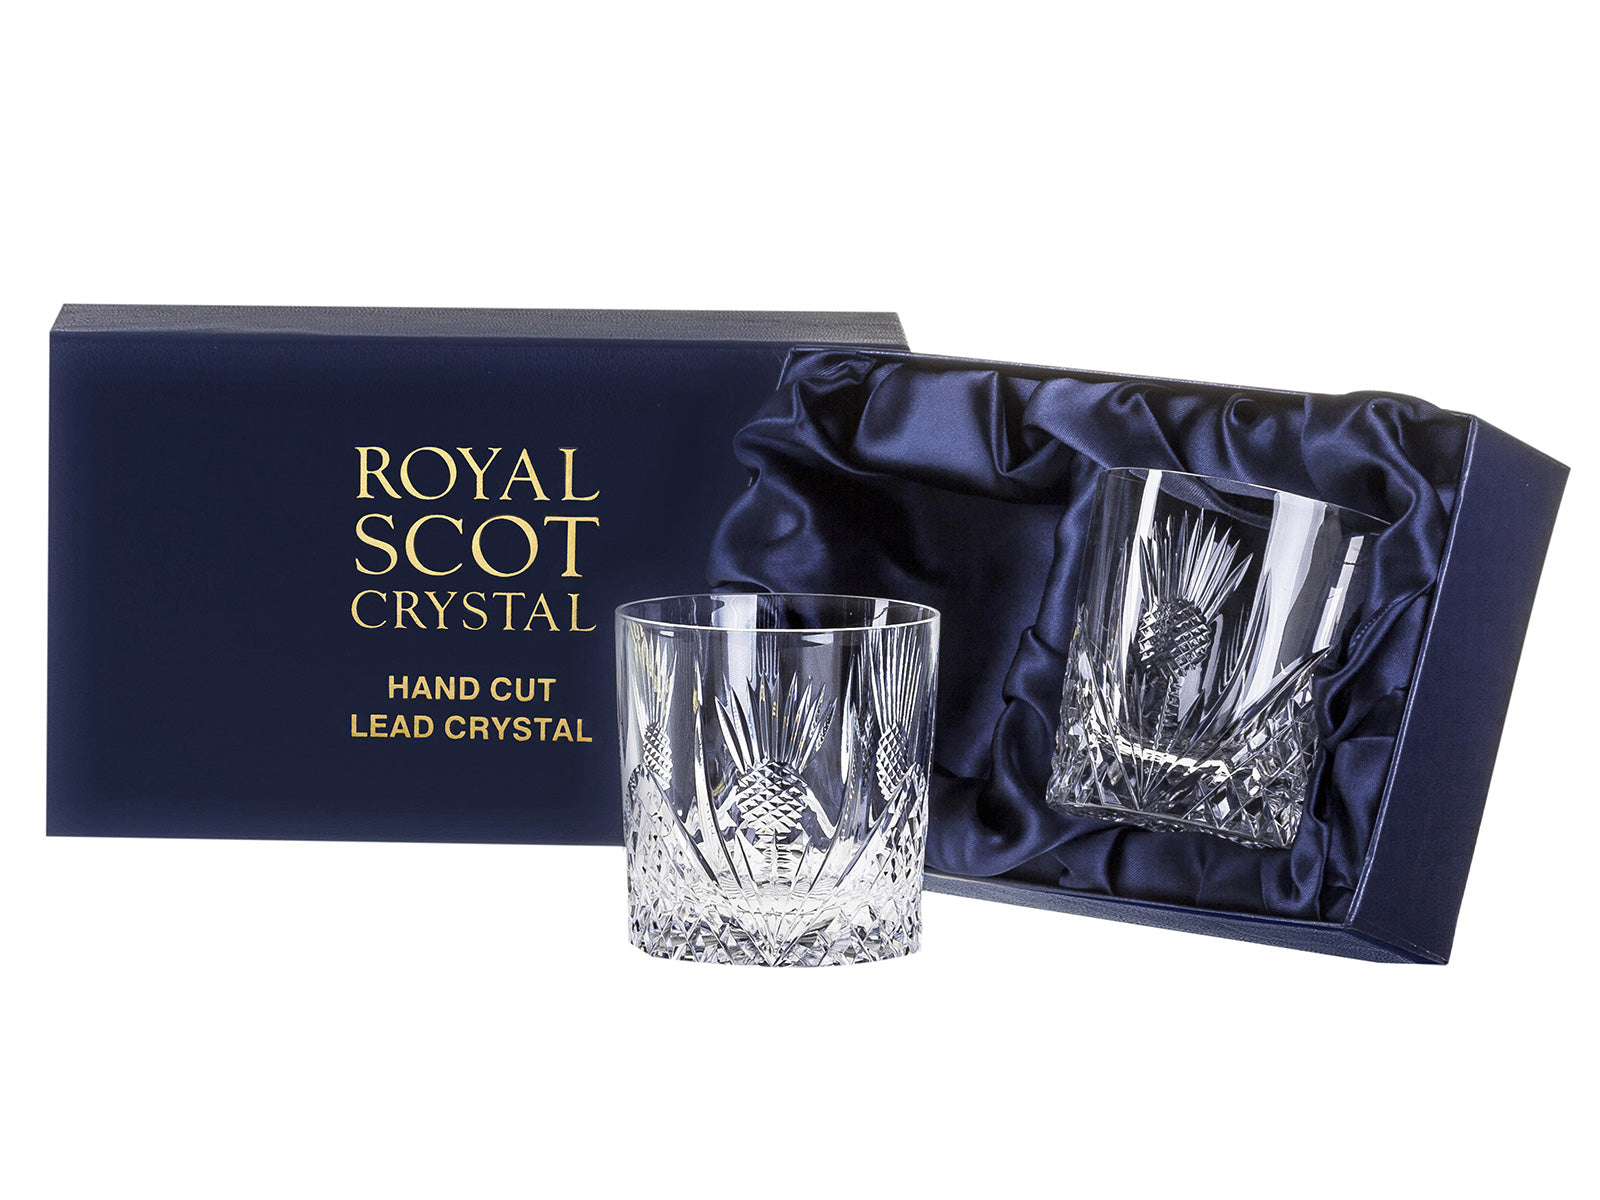 A pair of straight-edged crystal tumblers with a scottish thistle pattern cut into the exterior. They come in a navy-blue silk-lined presentation box with gold branding on the lid.